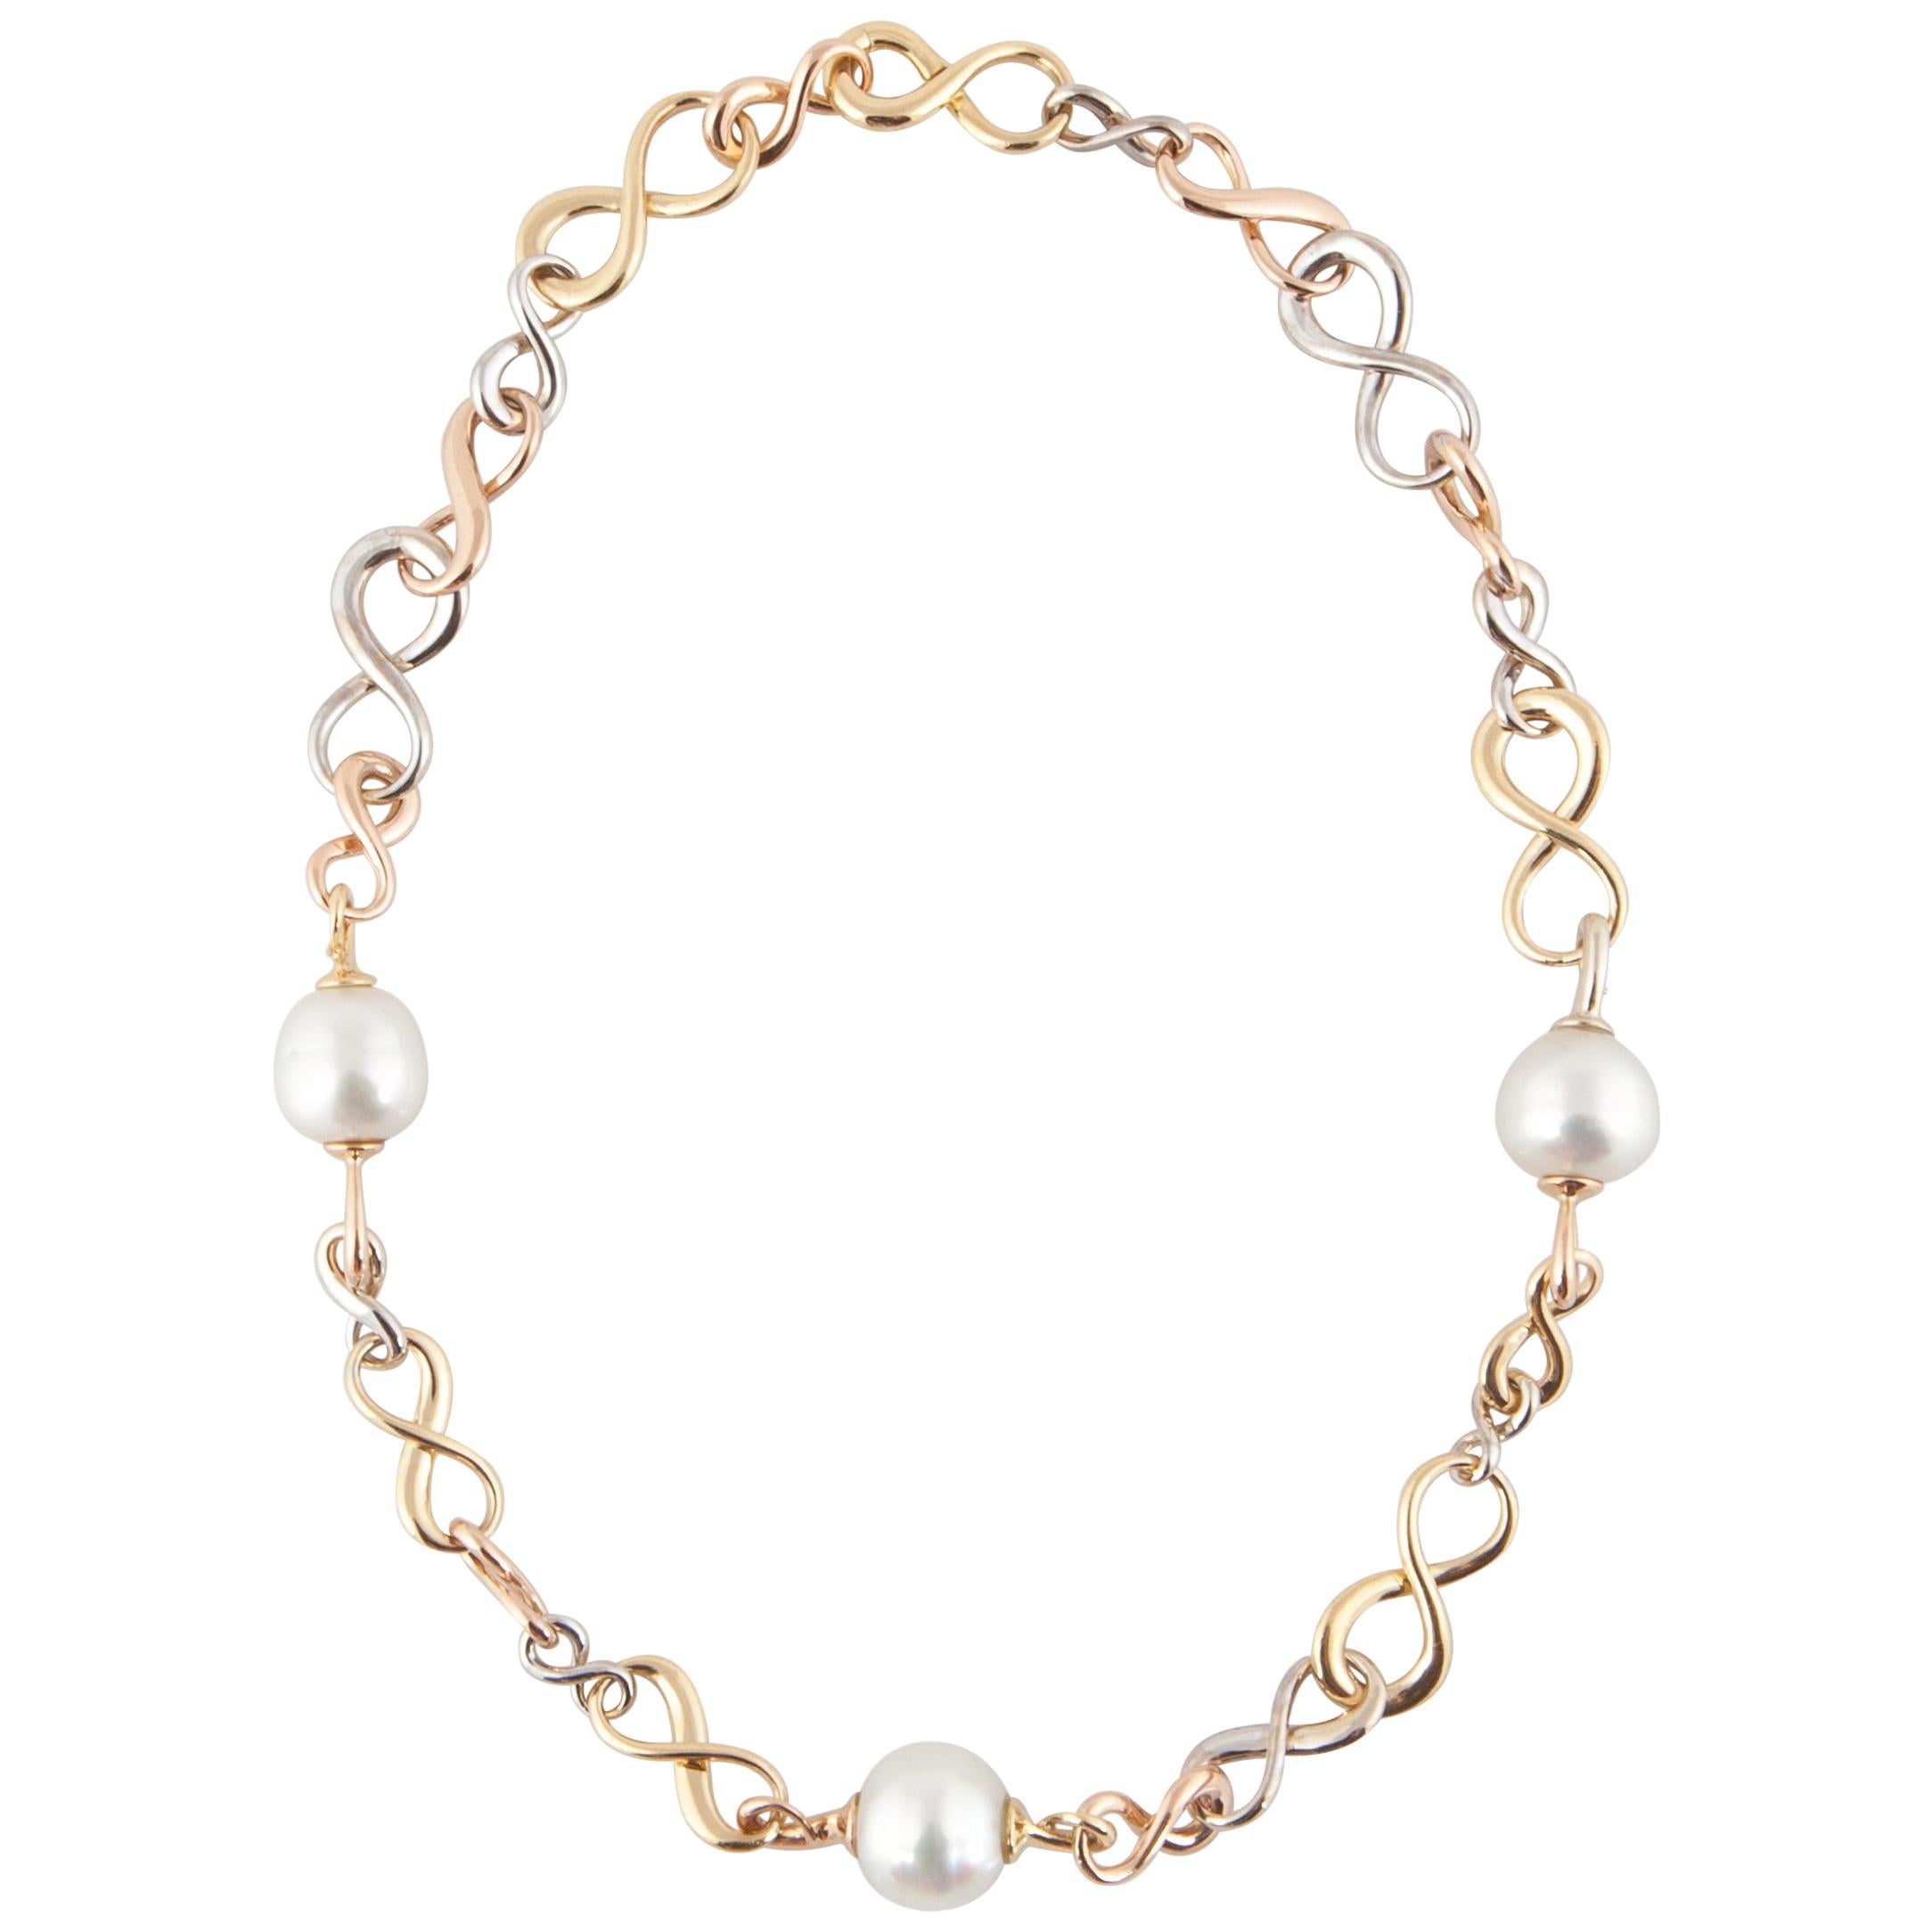 Figure Eight Link Pearl Necklace in 18K Gold